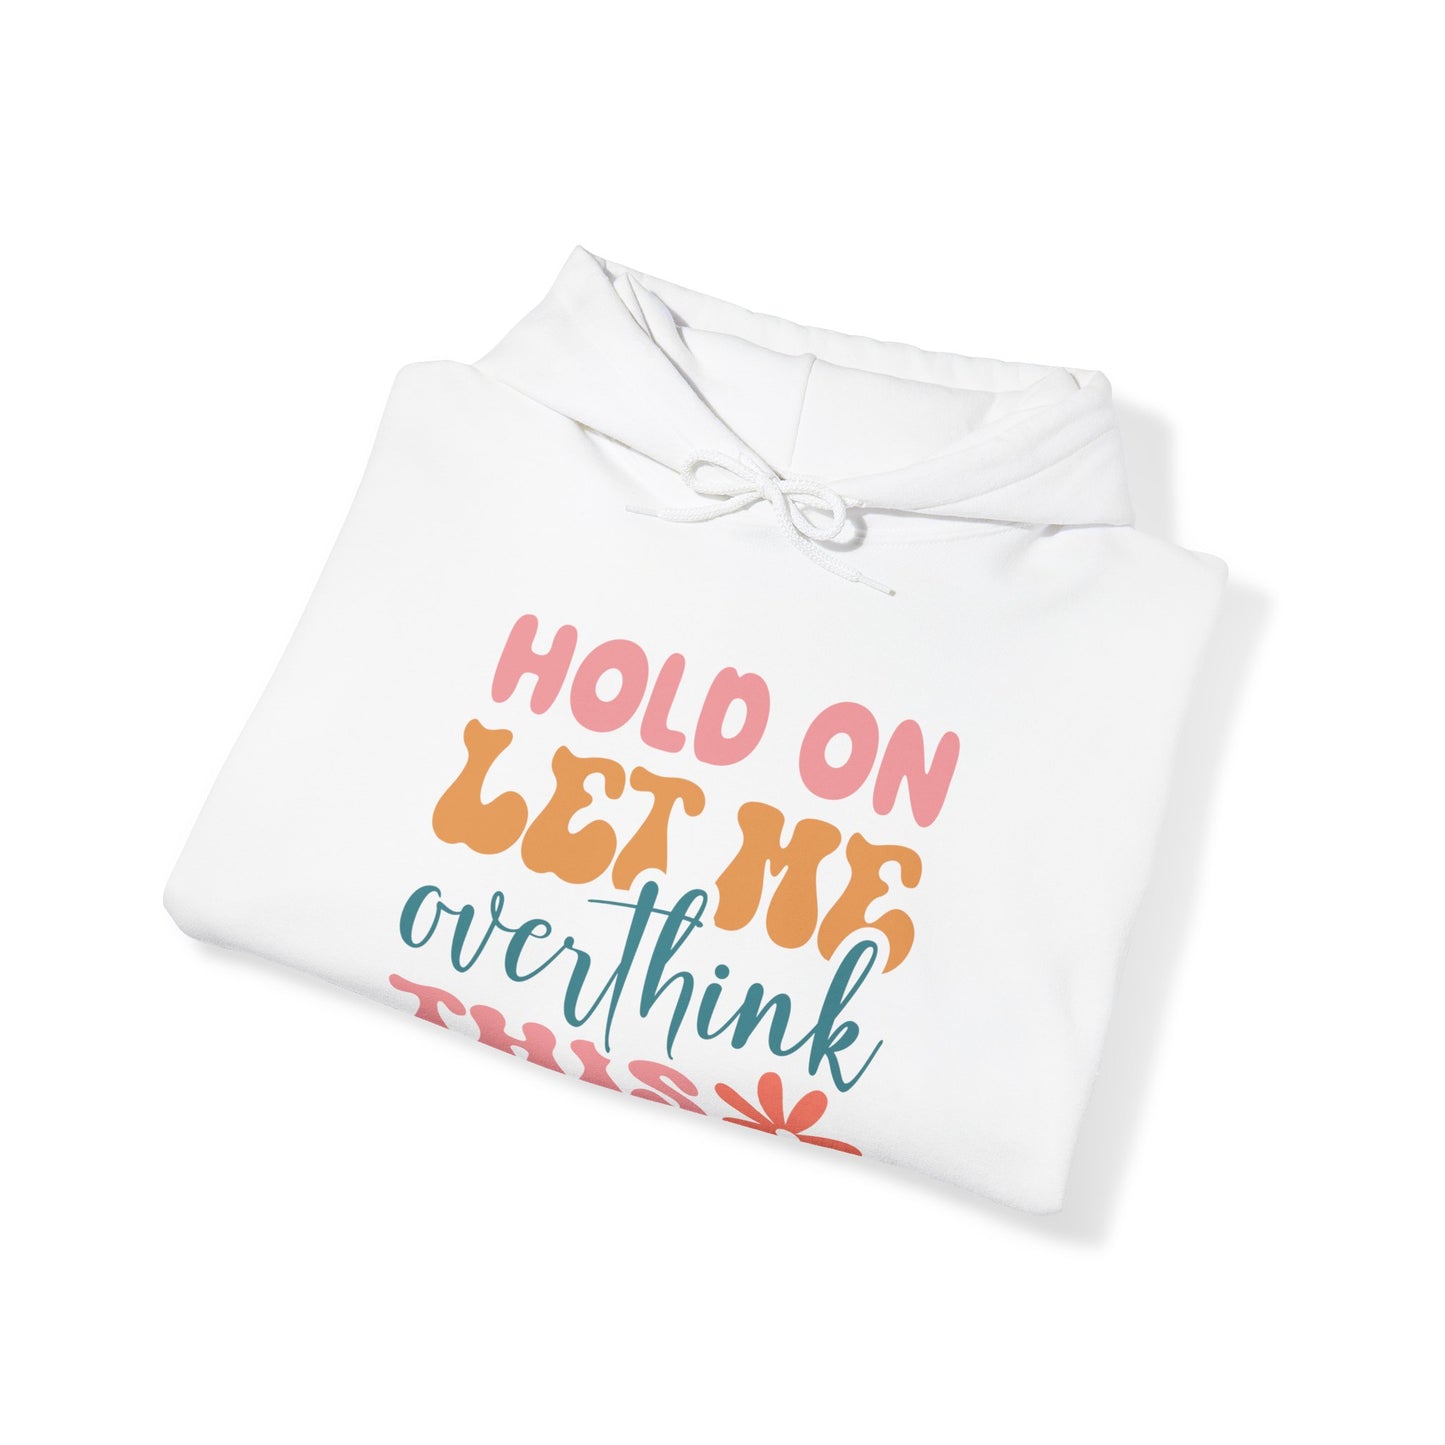 Hold on Let me Overthink This - Hooded Sweatshirt